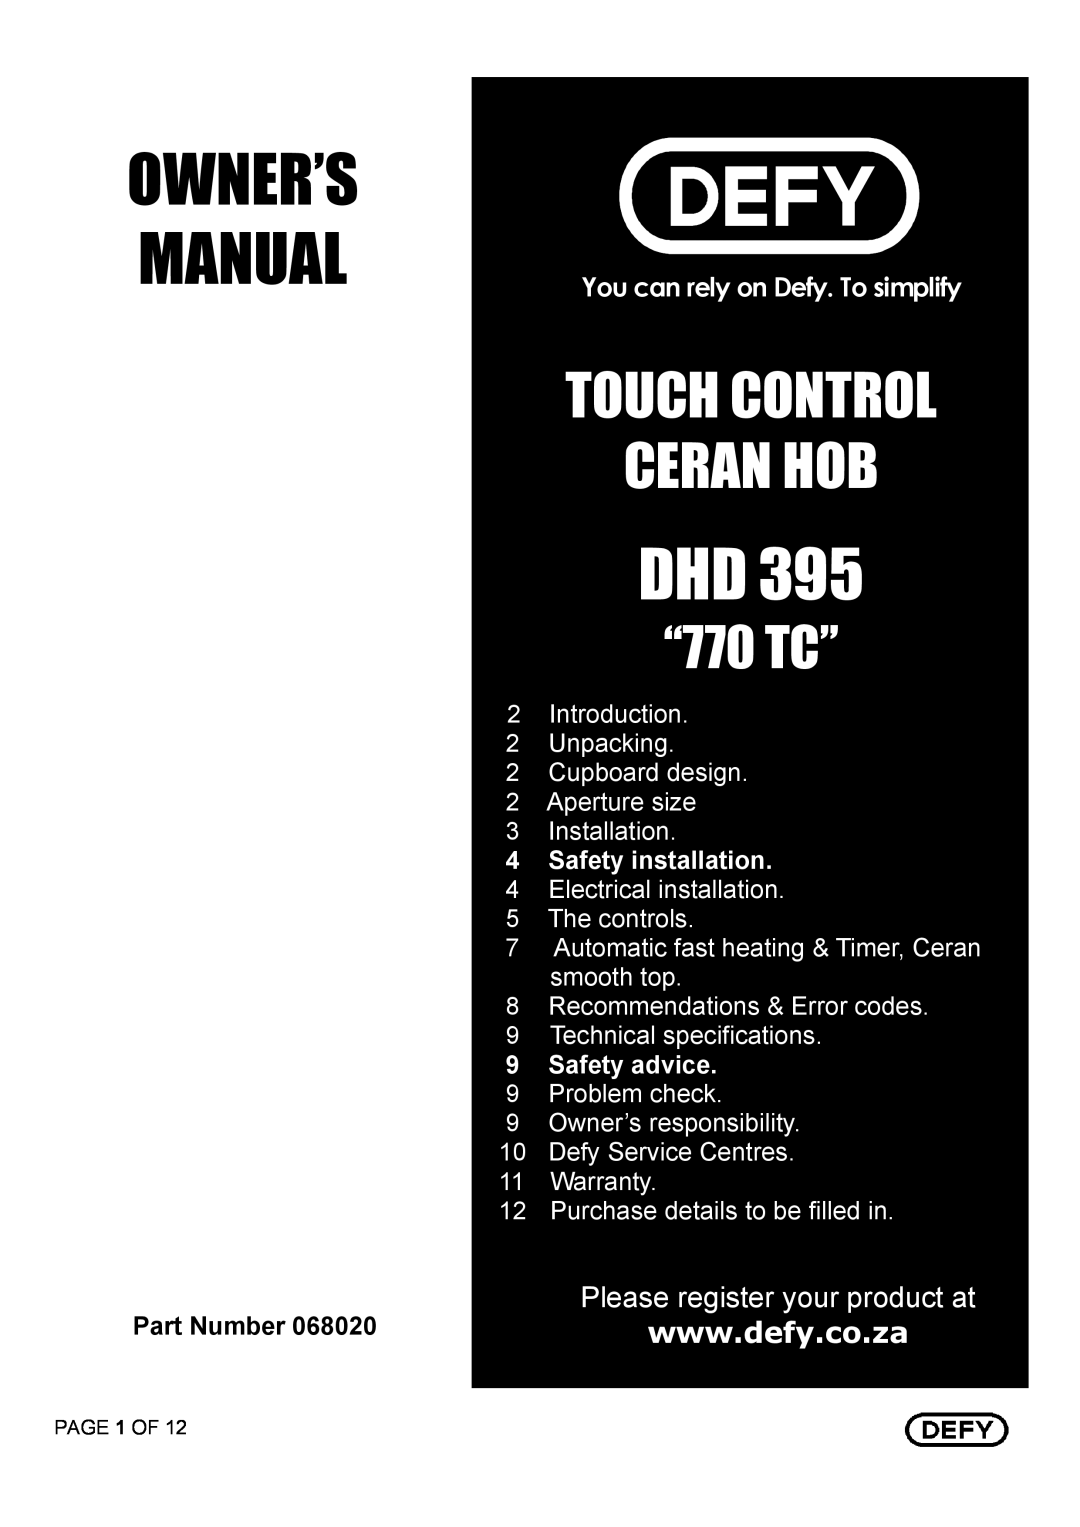 Defy Appliances DHD 395 owner manual Part Number, Touch Control Ceran Hob, “770 TC”, Please register your product at 